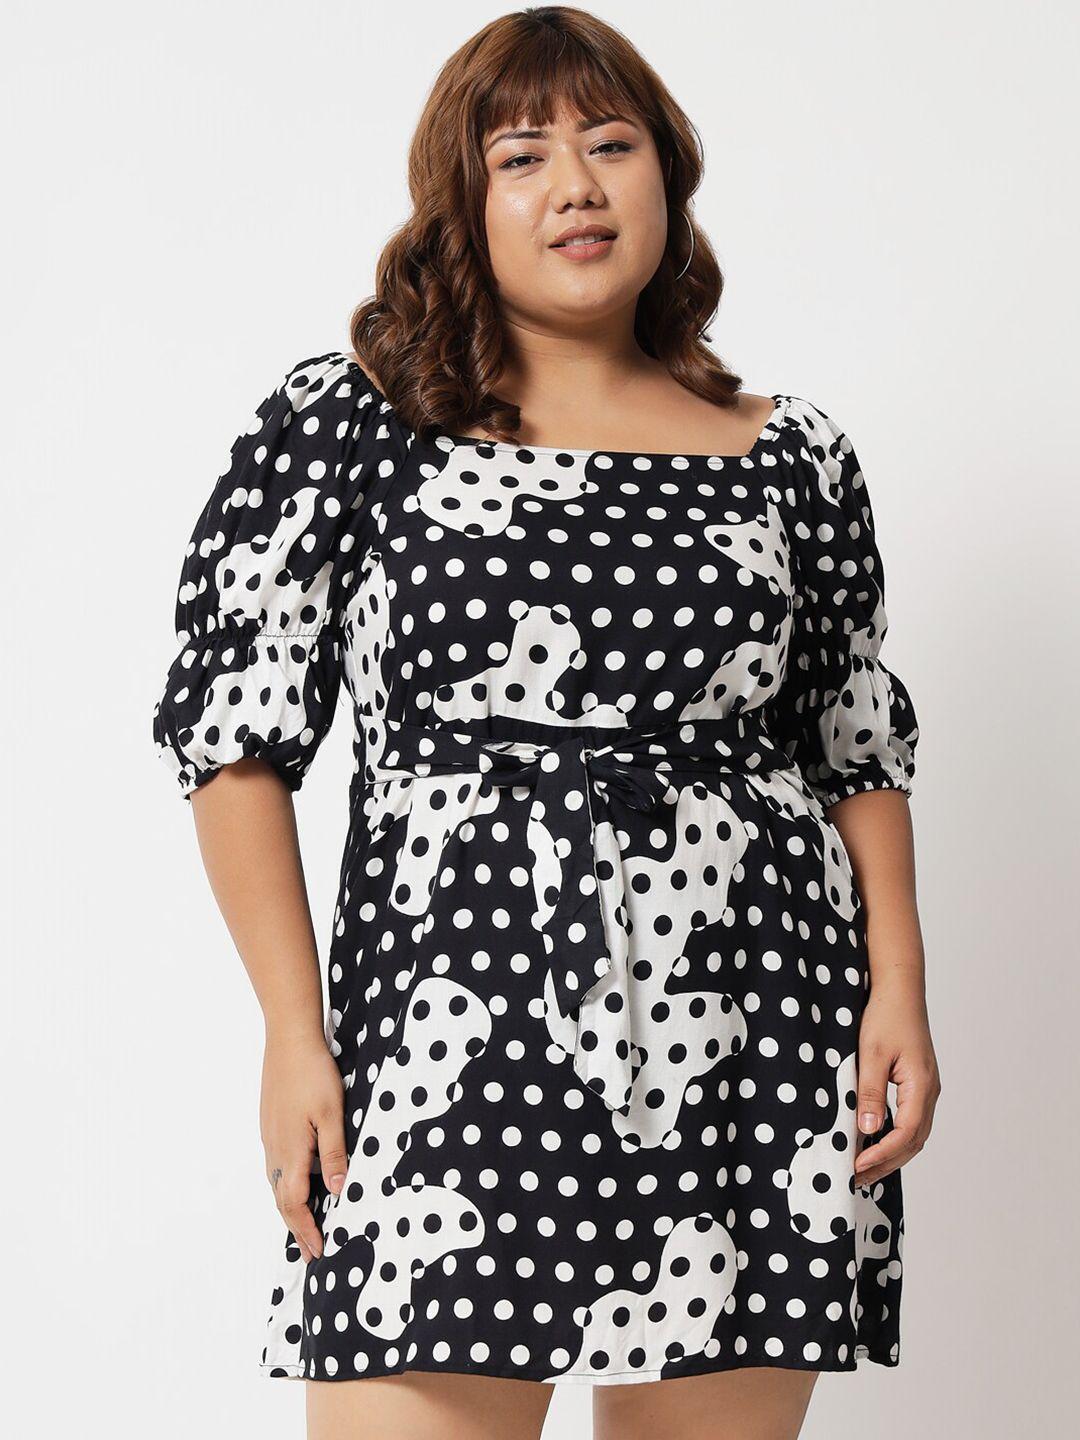 beyound size - the dry state women black & white dress